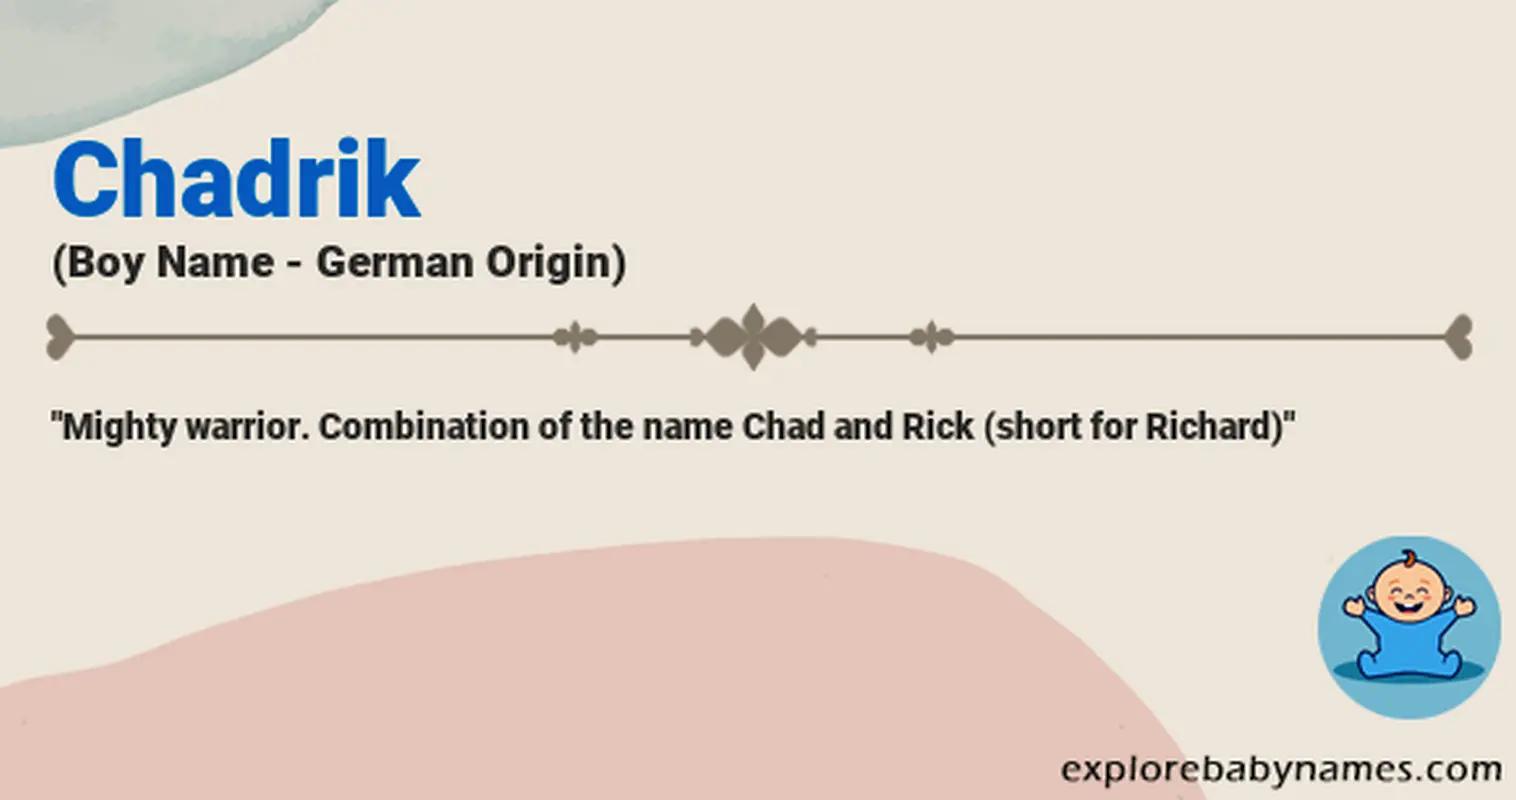 Meaning of Chadrik